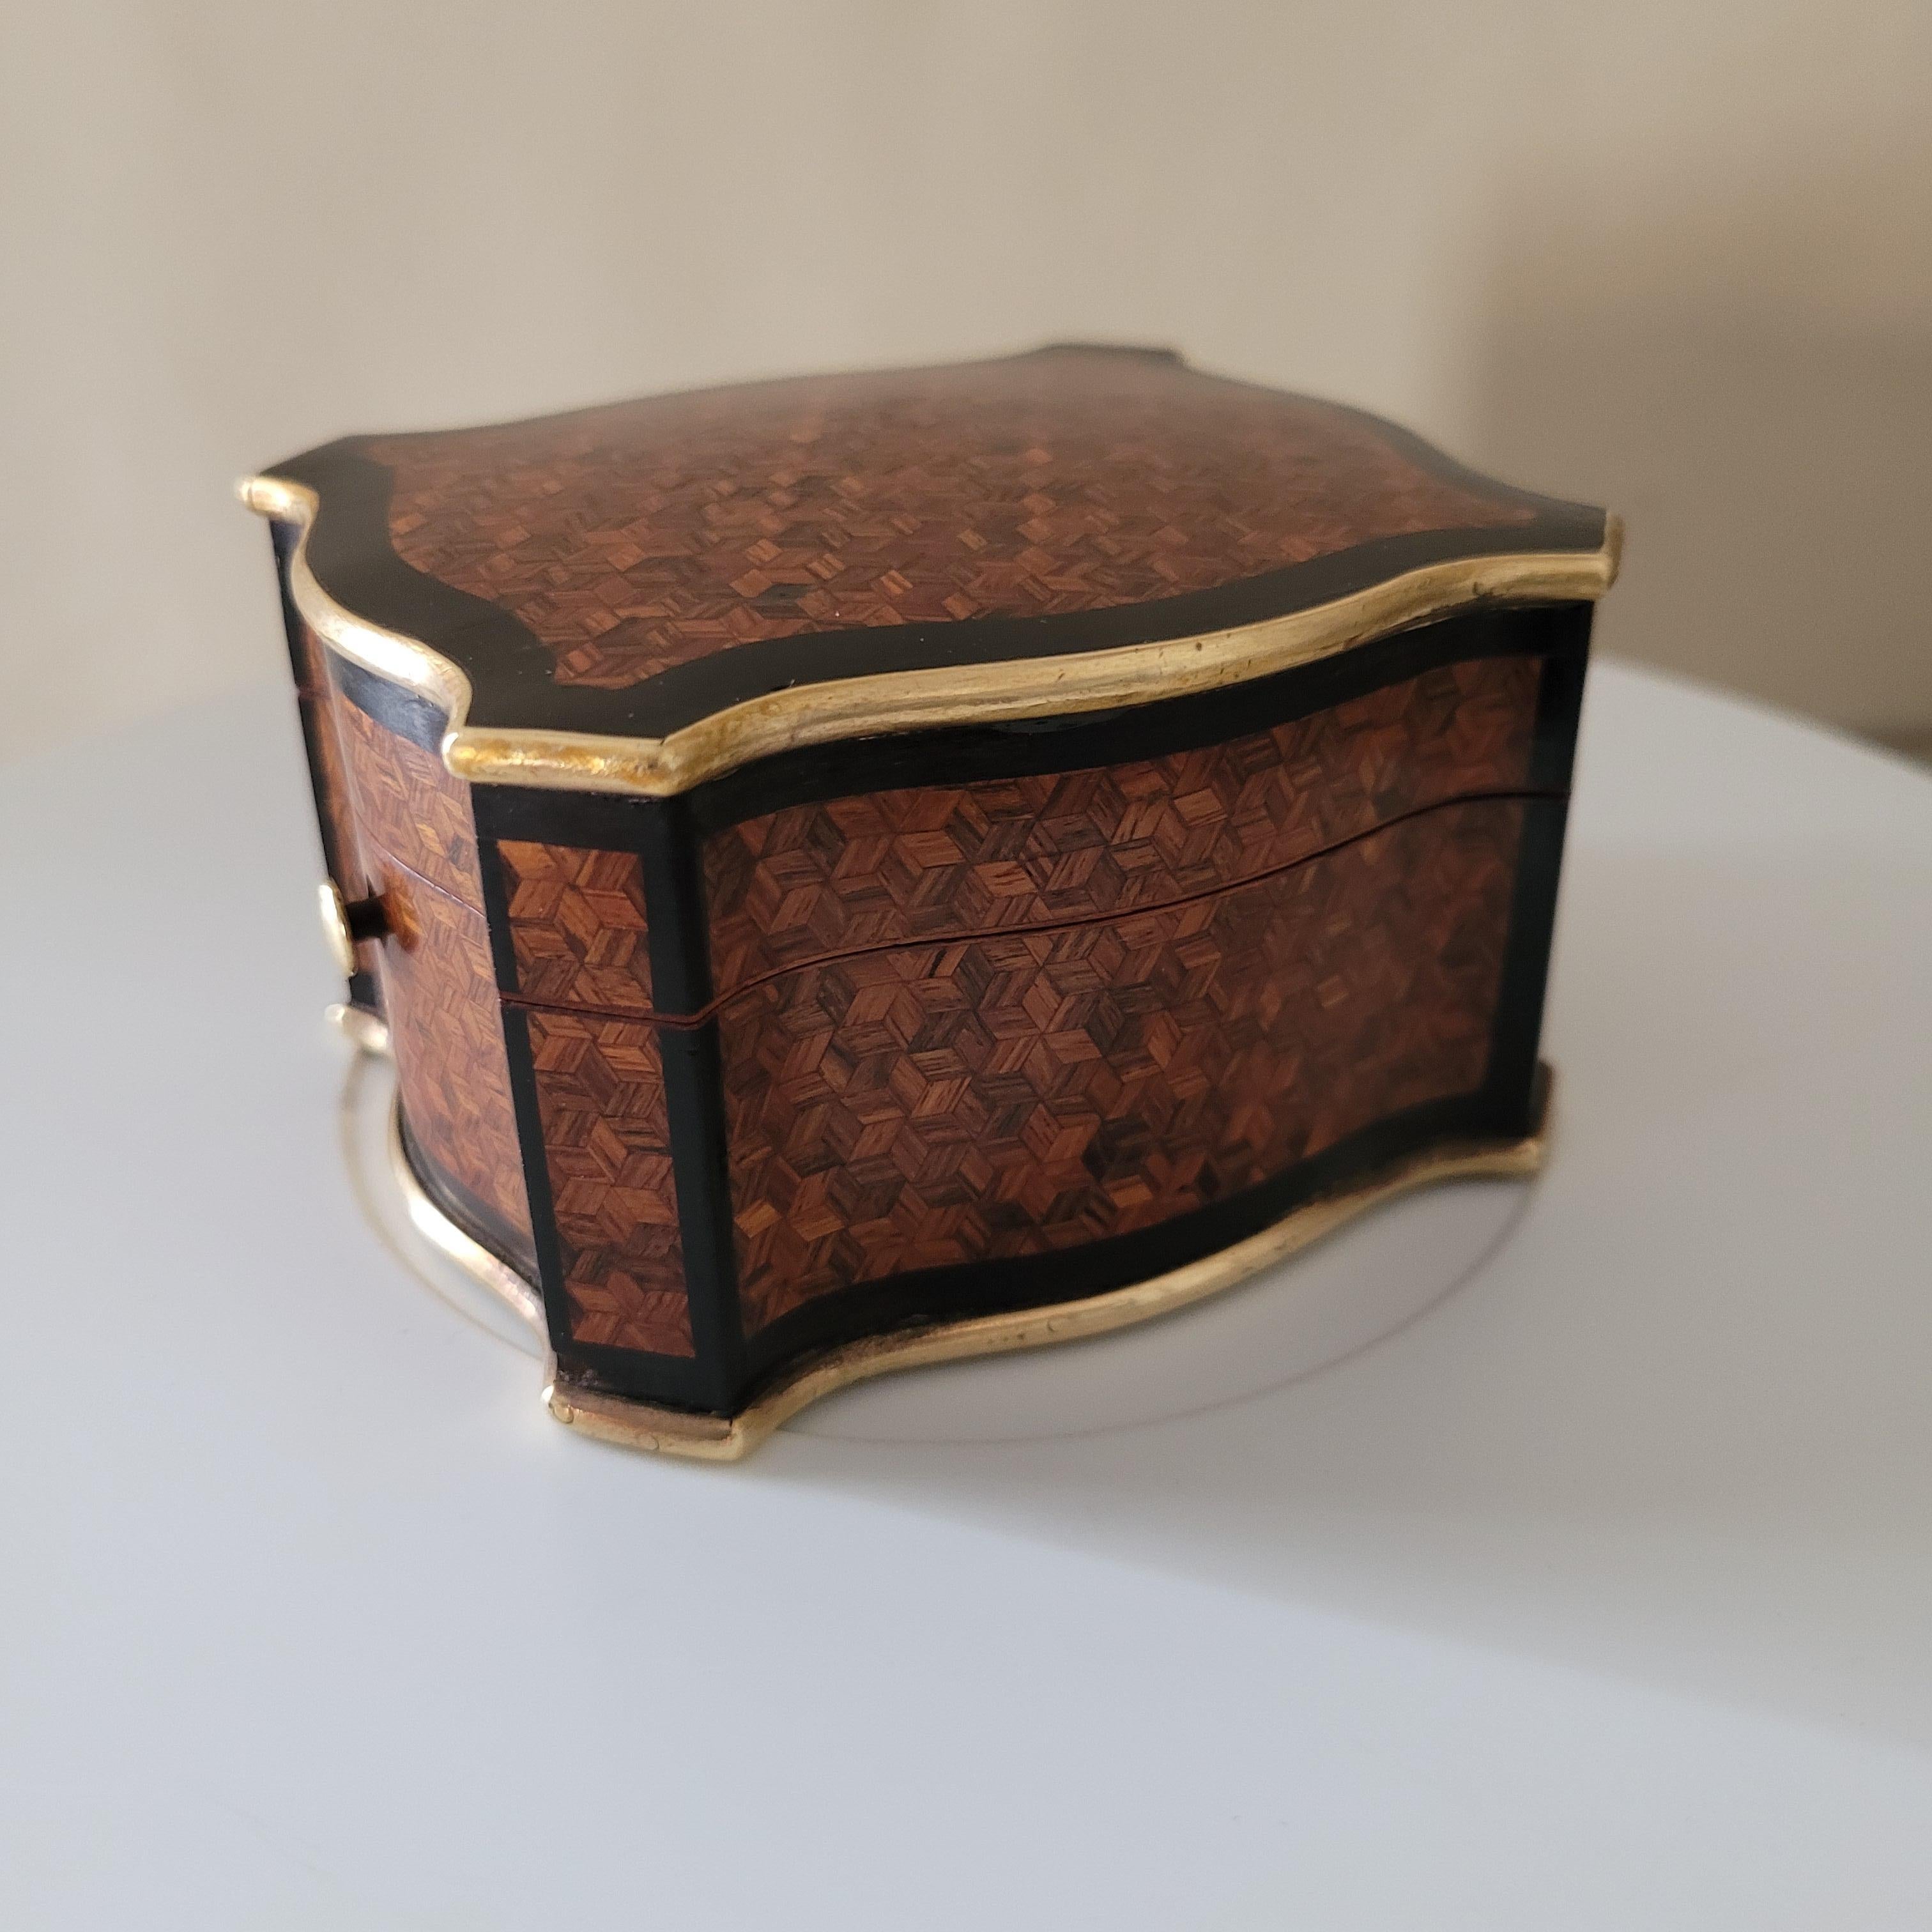 Napoleon III TAHAN Watch Holder, Napoleon 3 Period Rosewood and Ebony Marquetry, Good Cond.